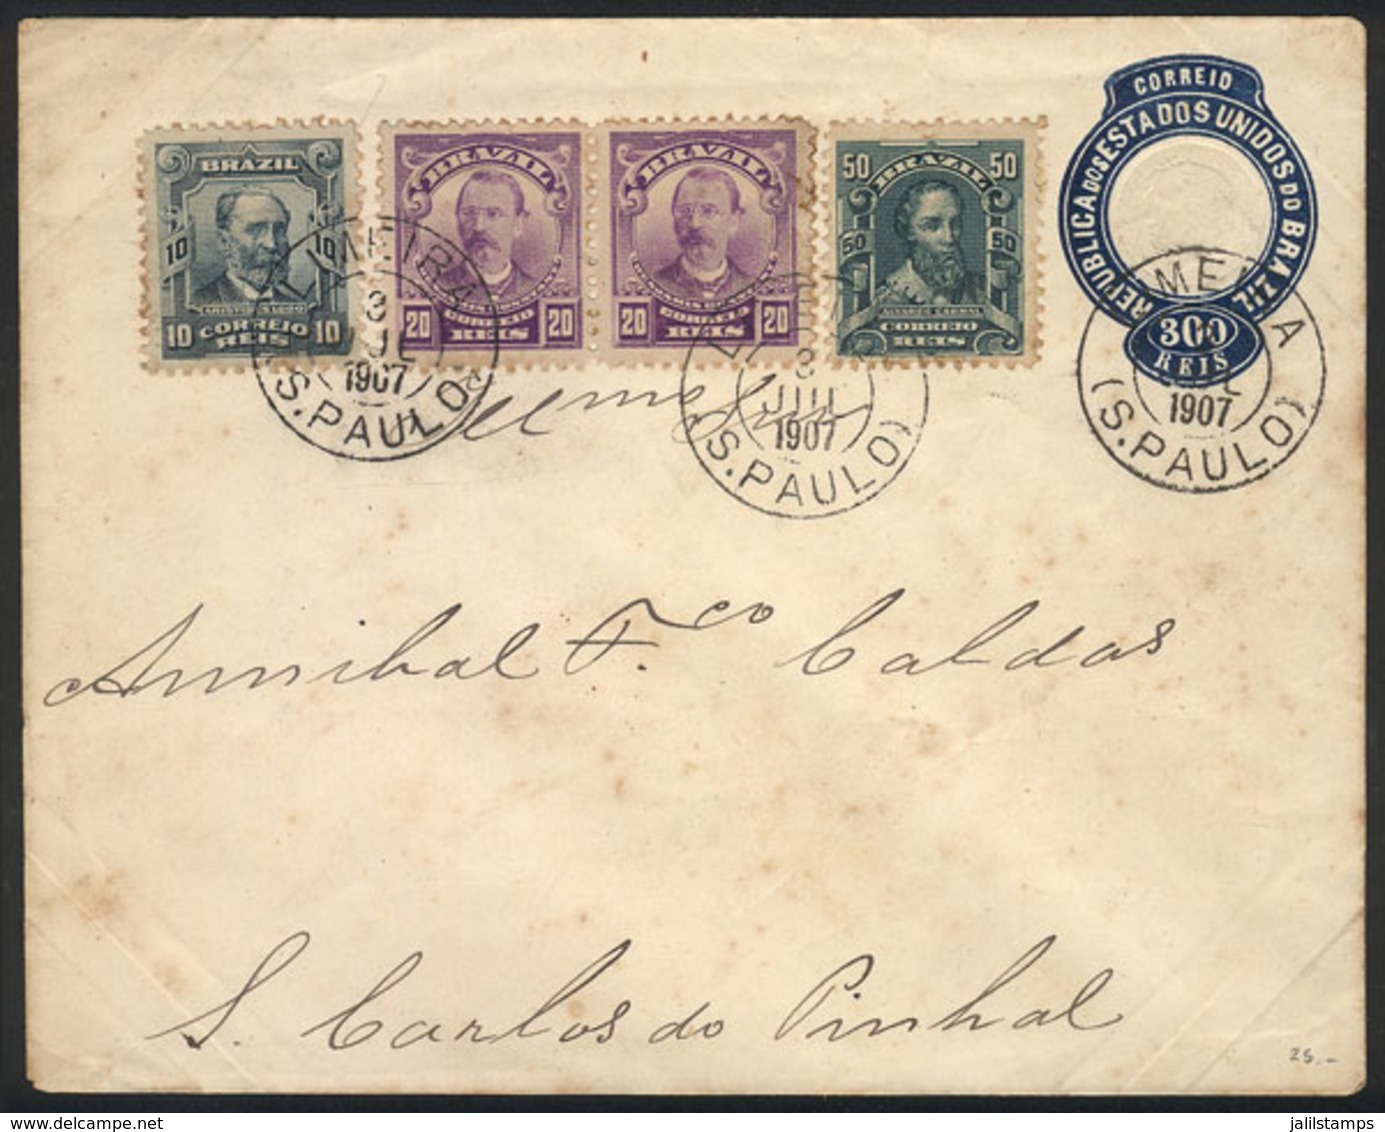 BRAZIL: 300Rs. Stationery Envelope + 100Rs. Sent To S.Carlos Do Pinhal On 3/JUL/1907, Cancelled In LIMEIRA (S.Paulo), VF - Vorphilatelie